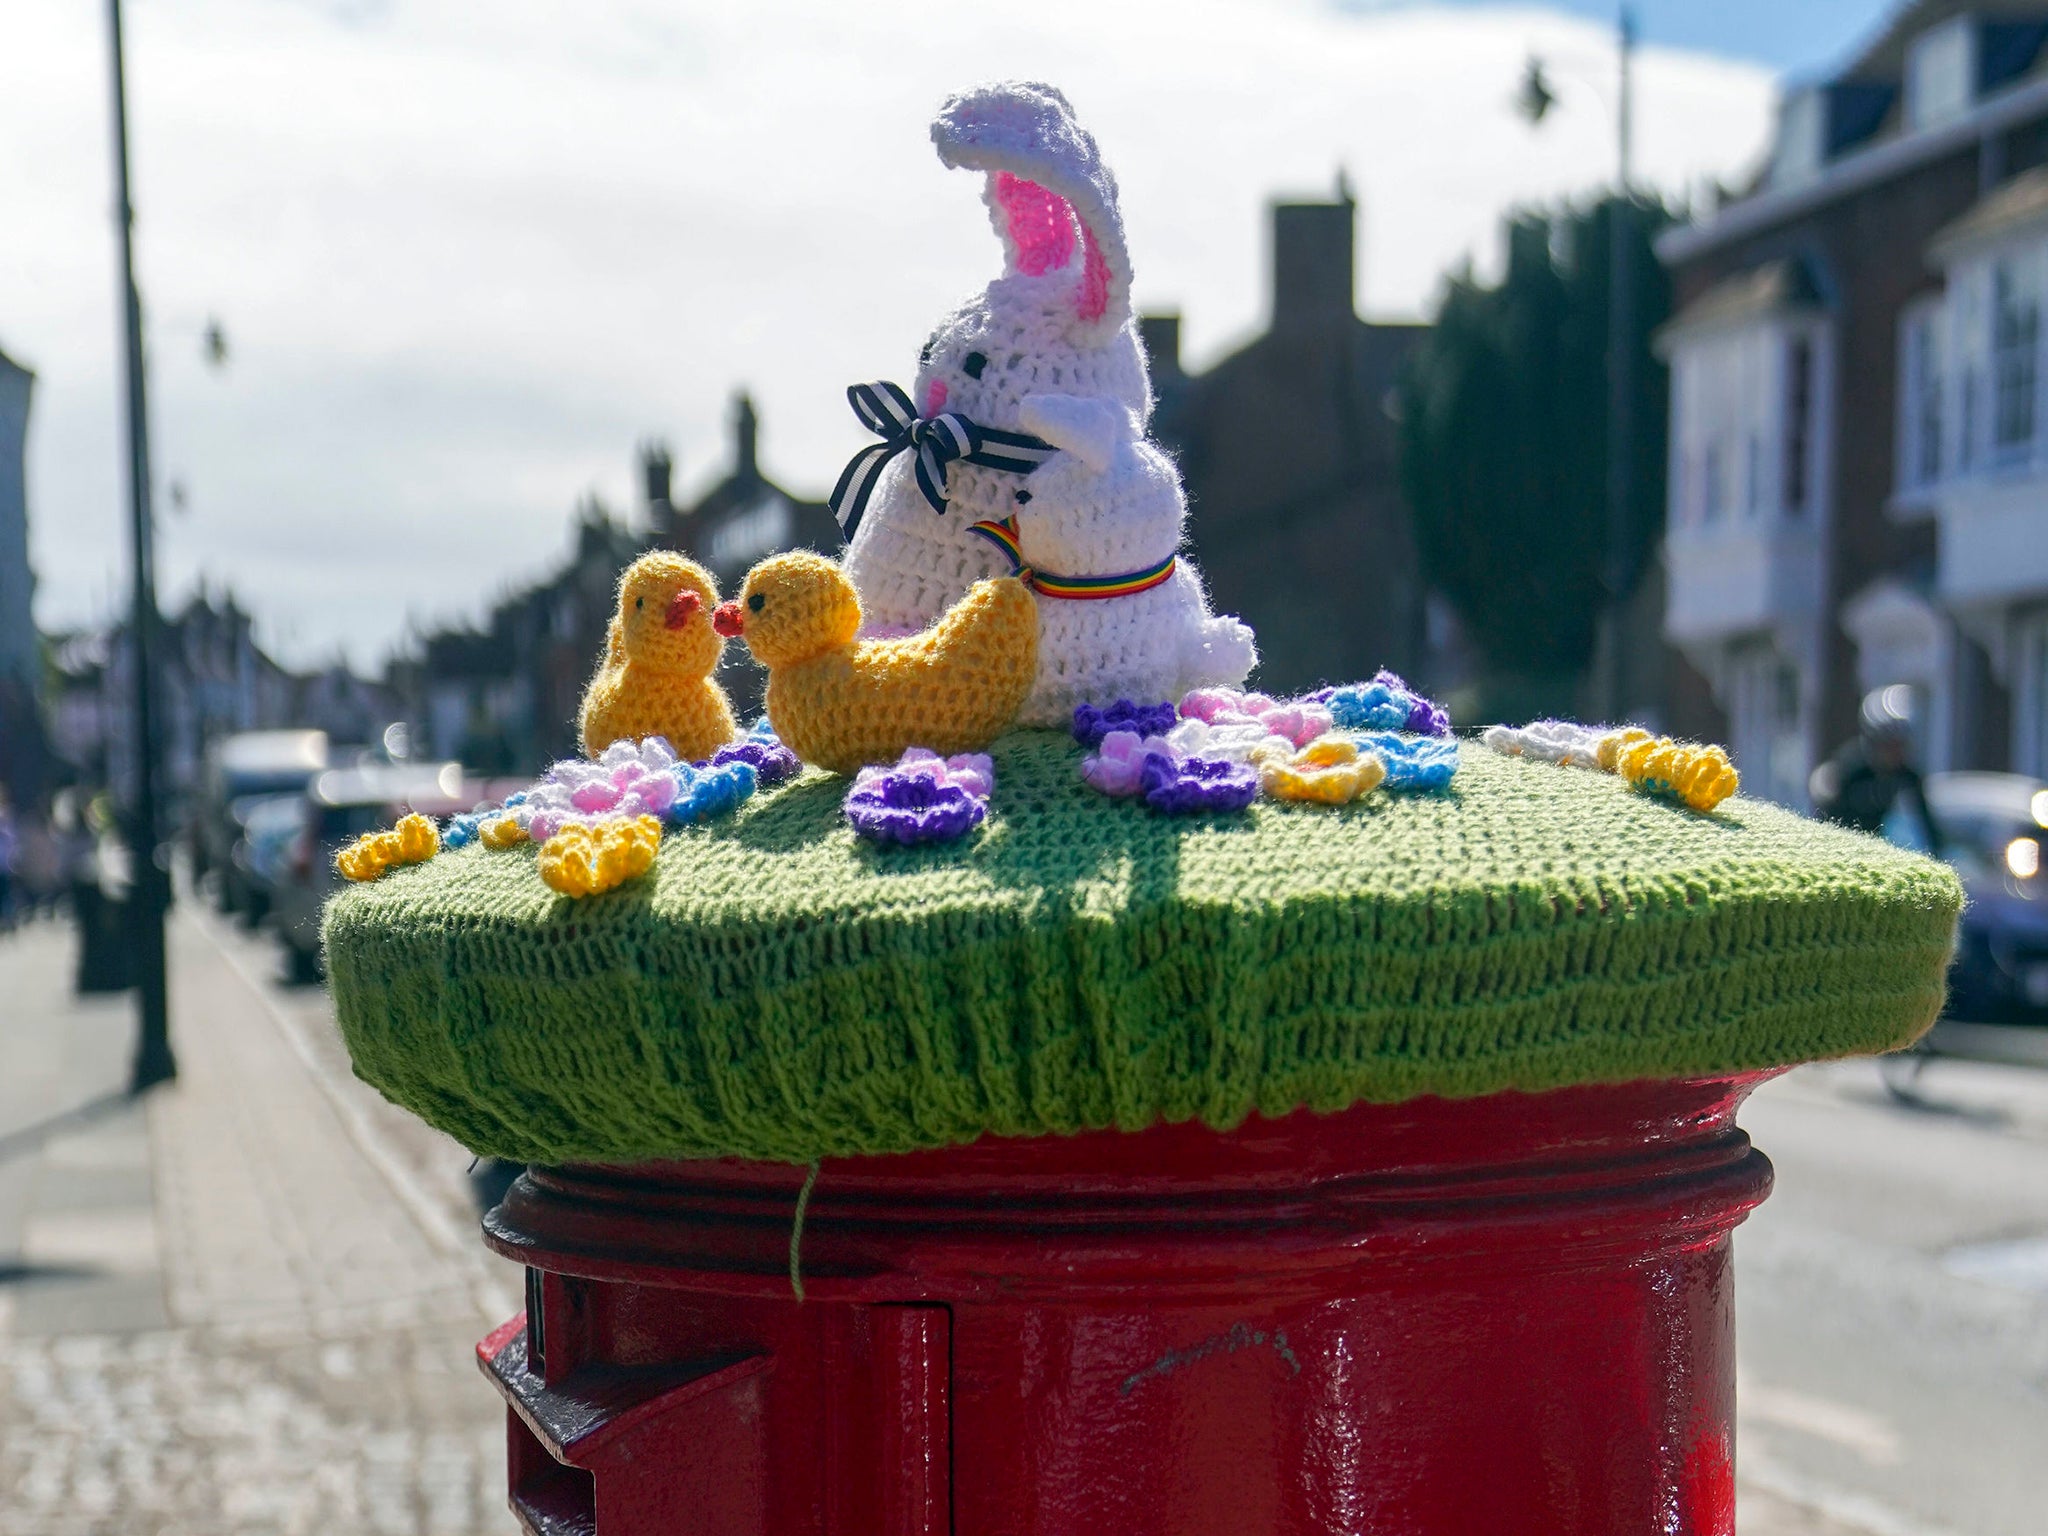 This Easter scene in Sussex looks set to stay dry